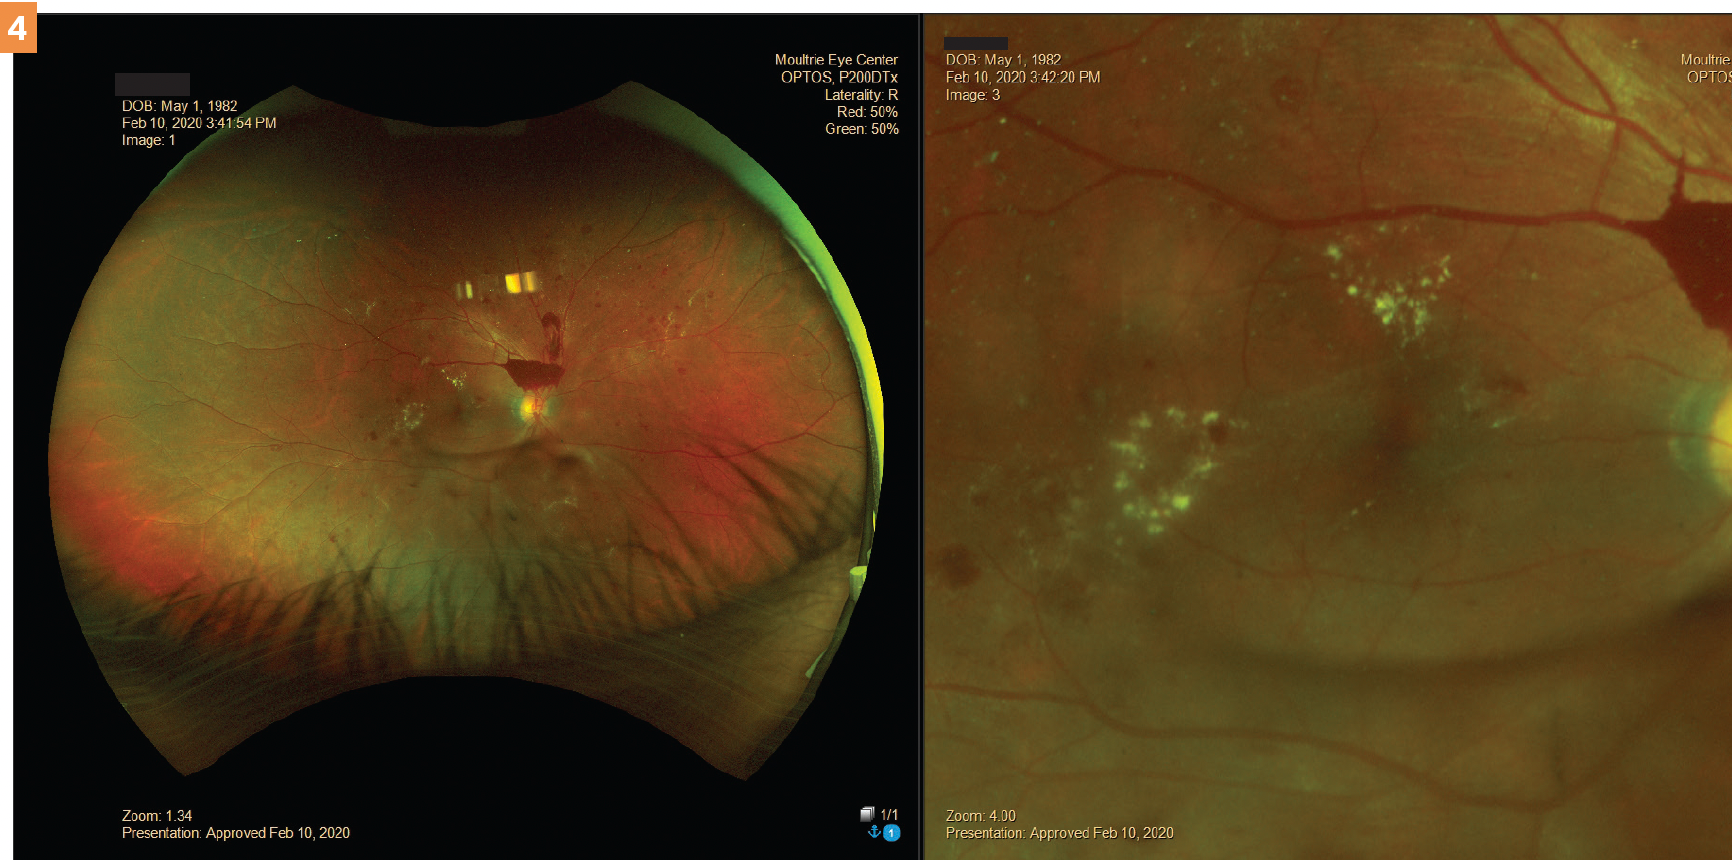 Figure 4. Clinically significant diabetic retinopathy.